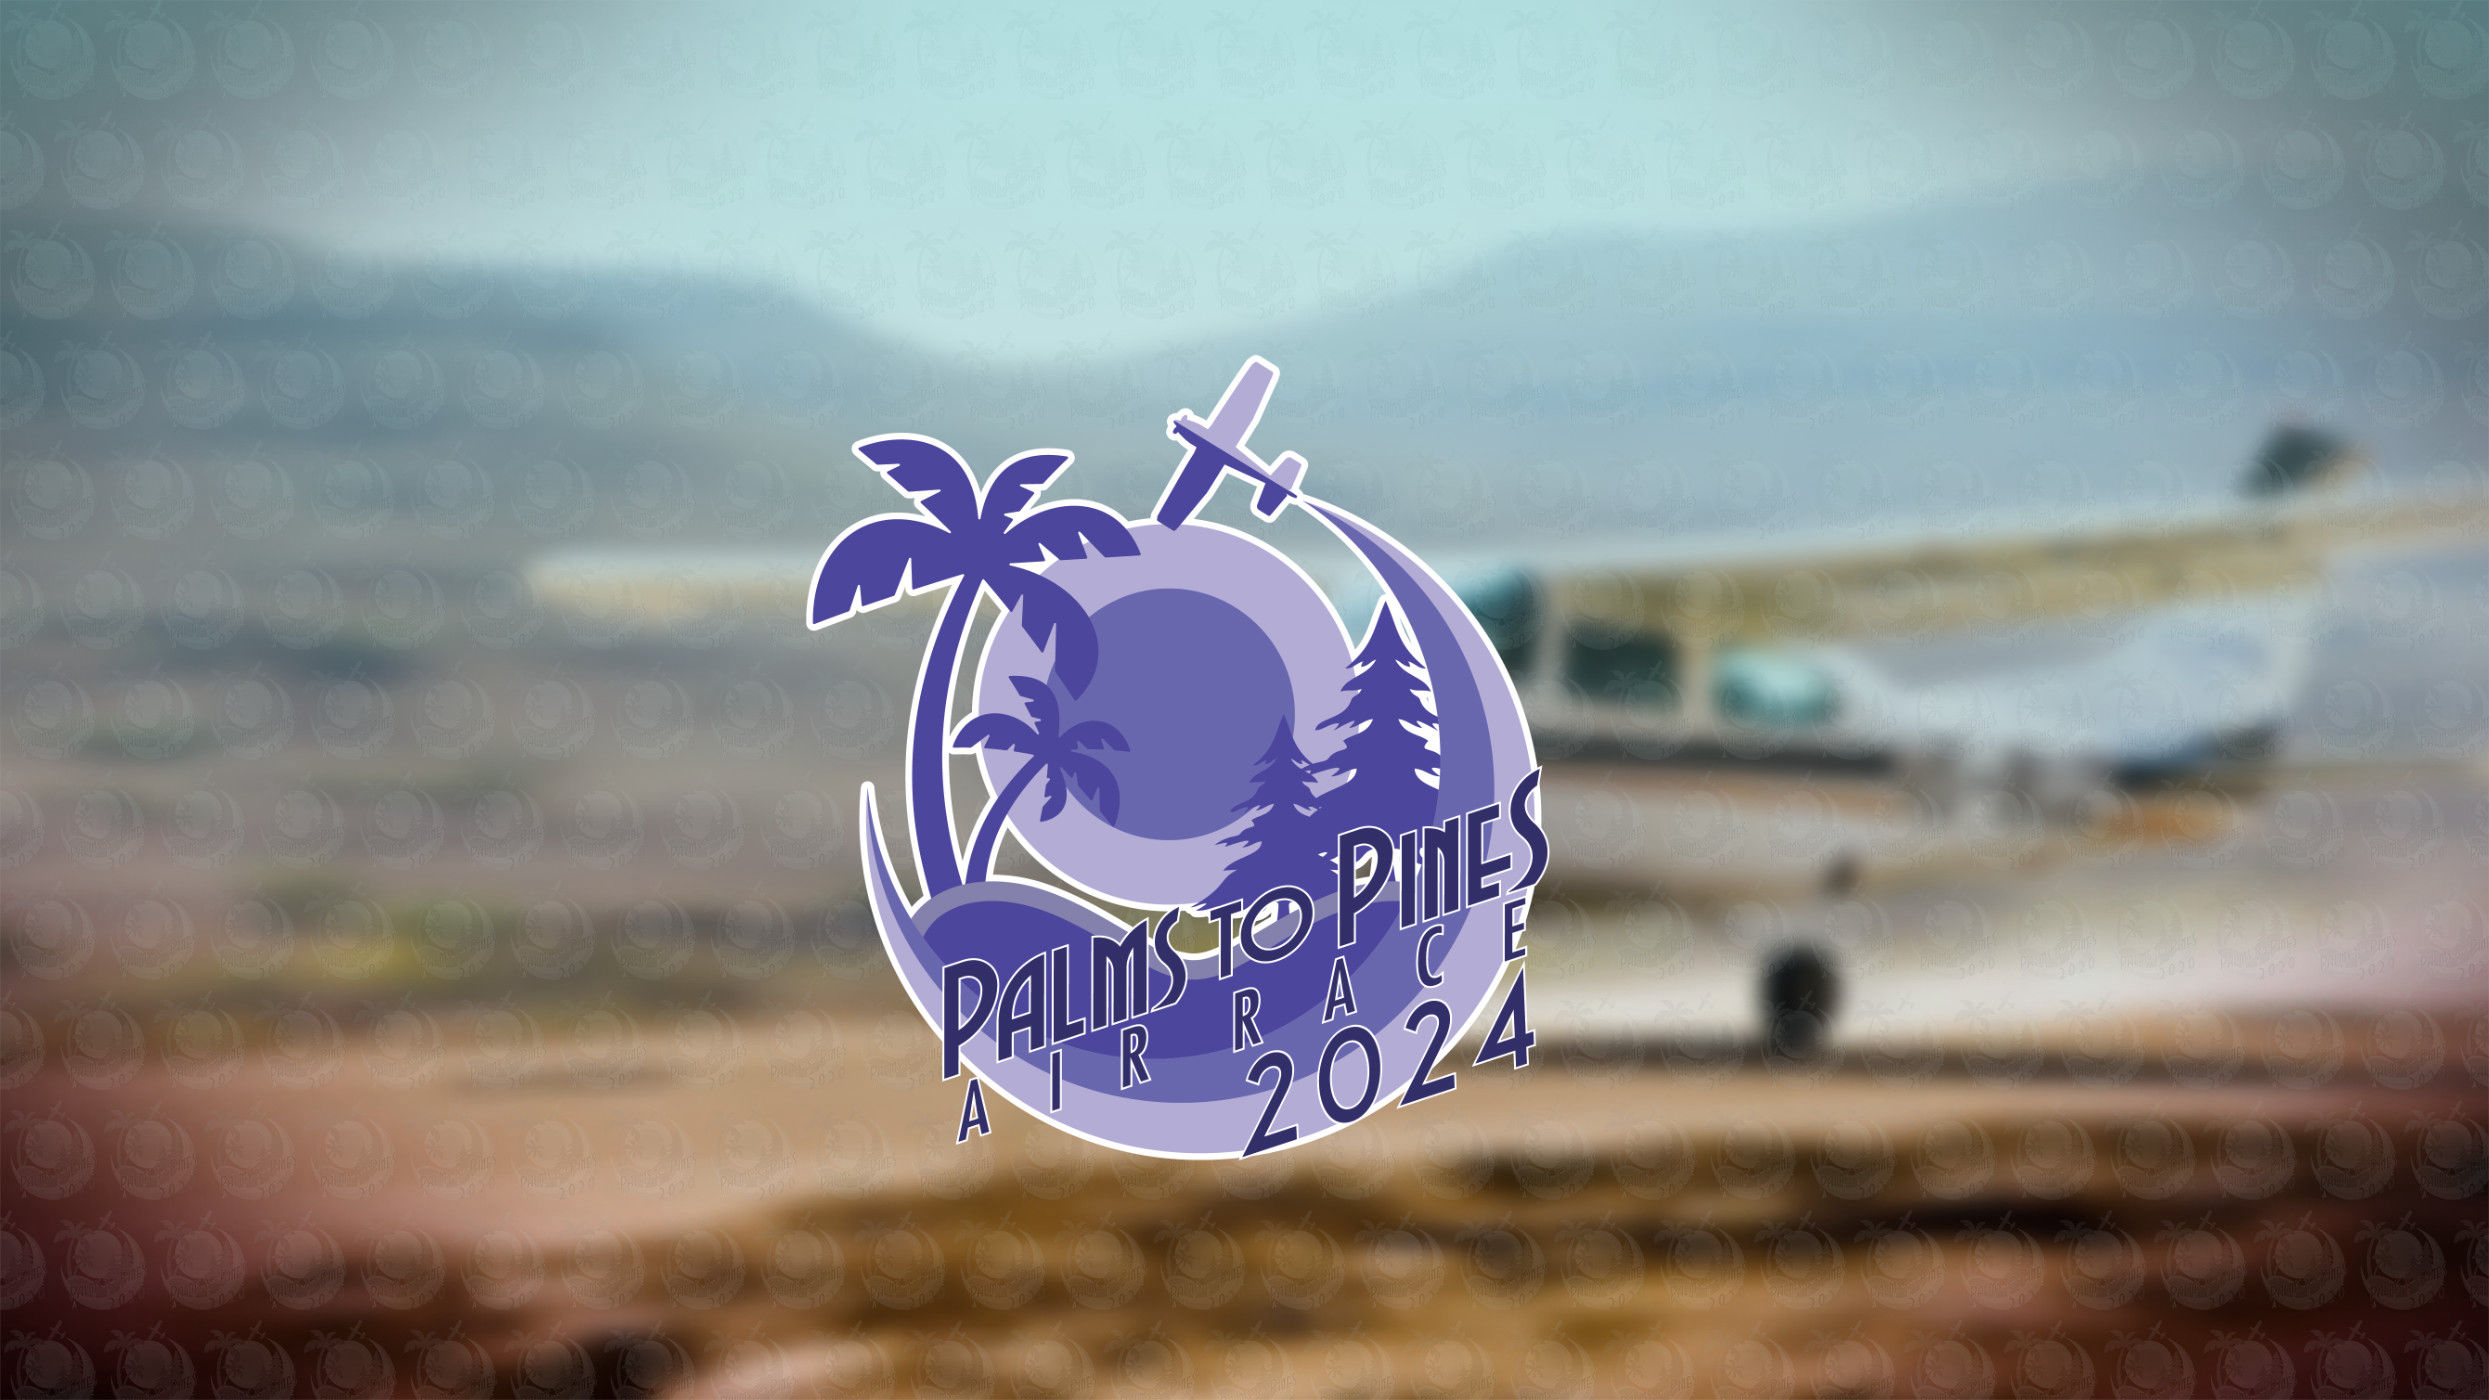 Palms to Pines Air Race 2024